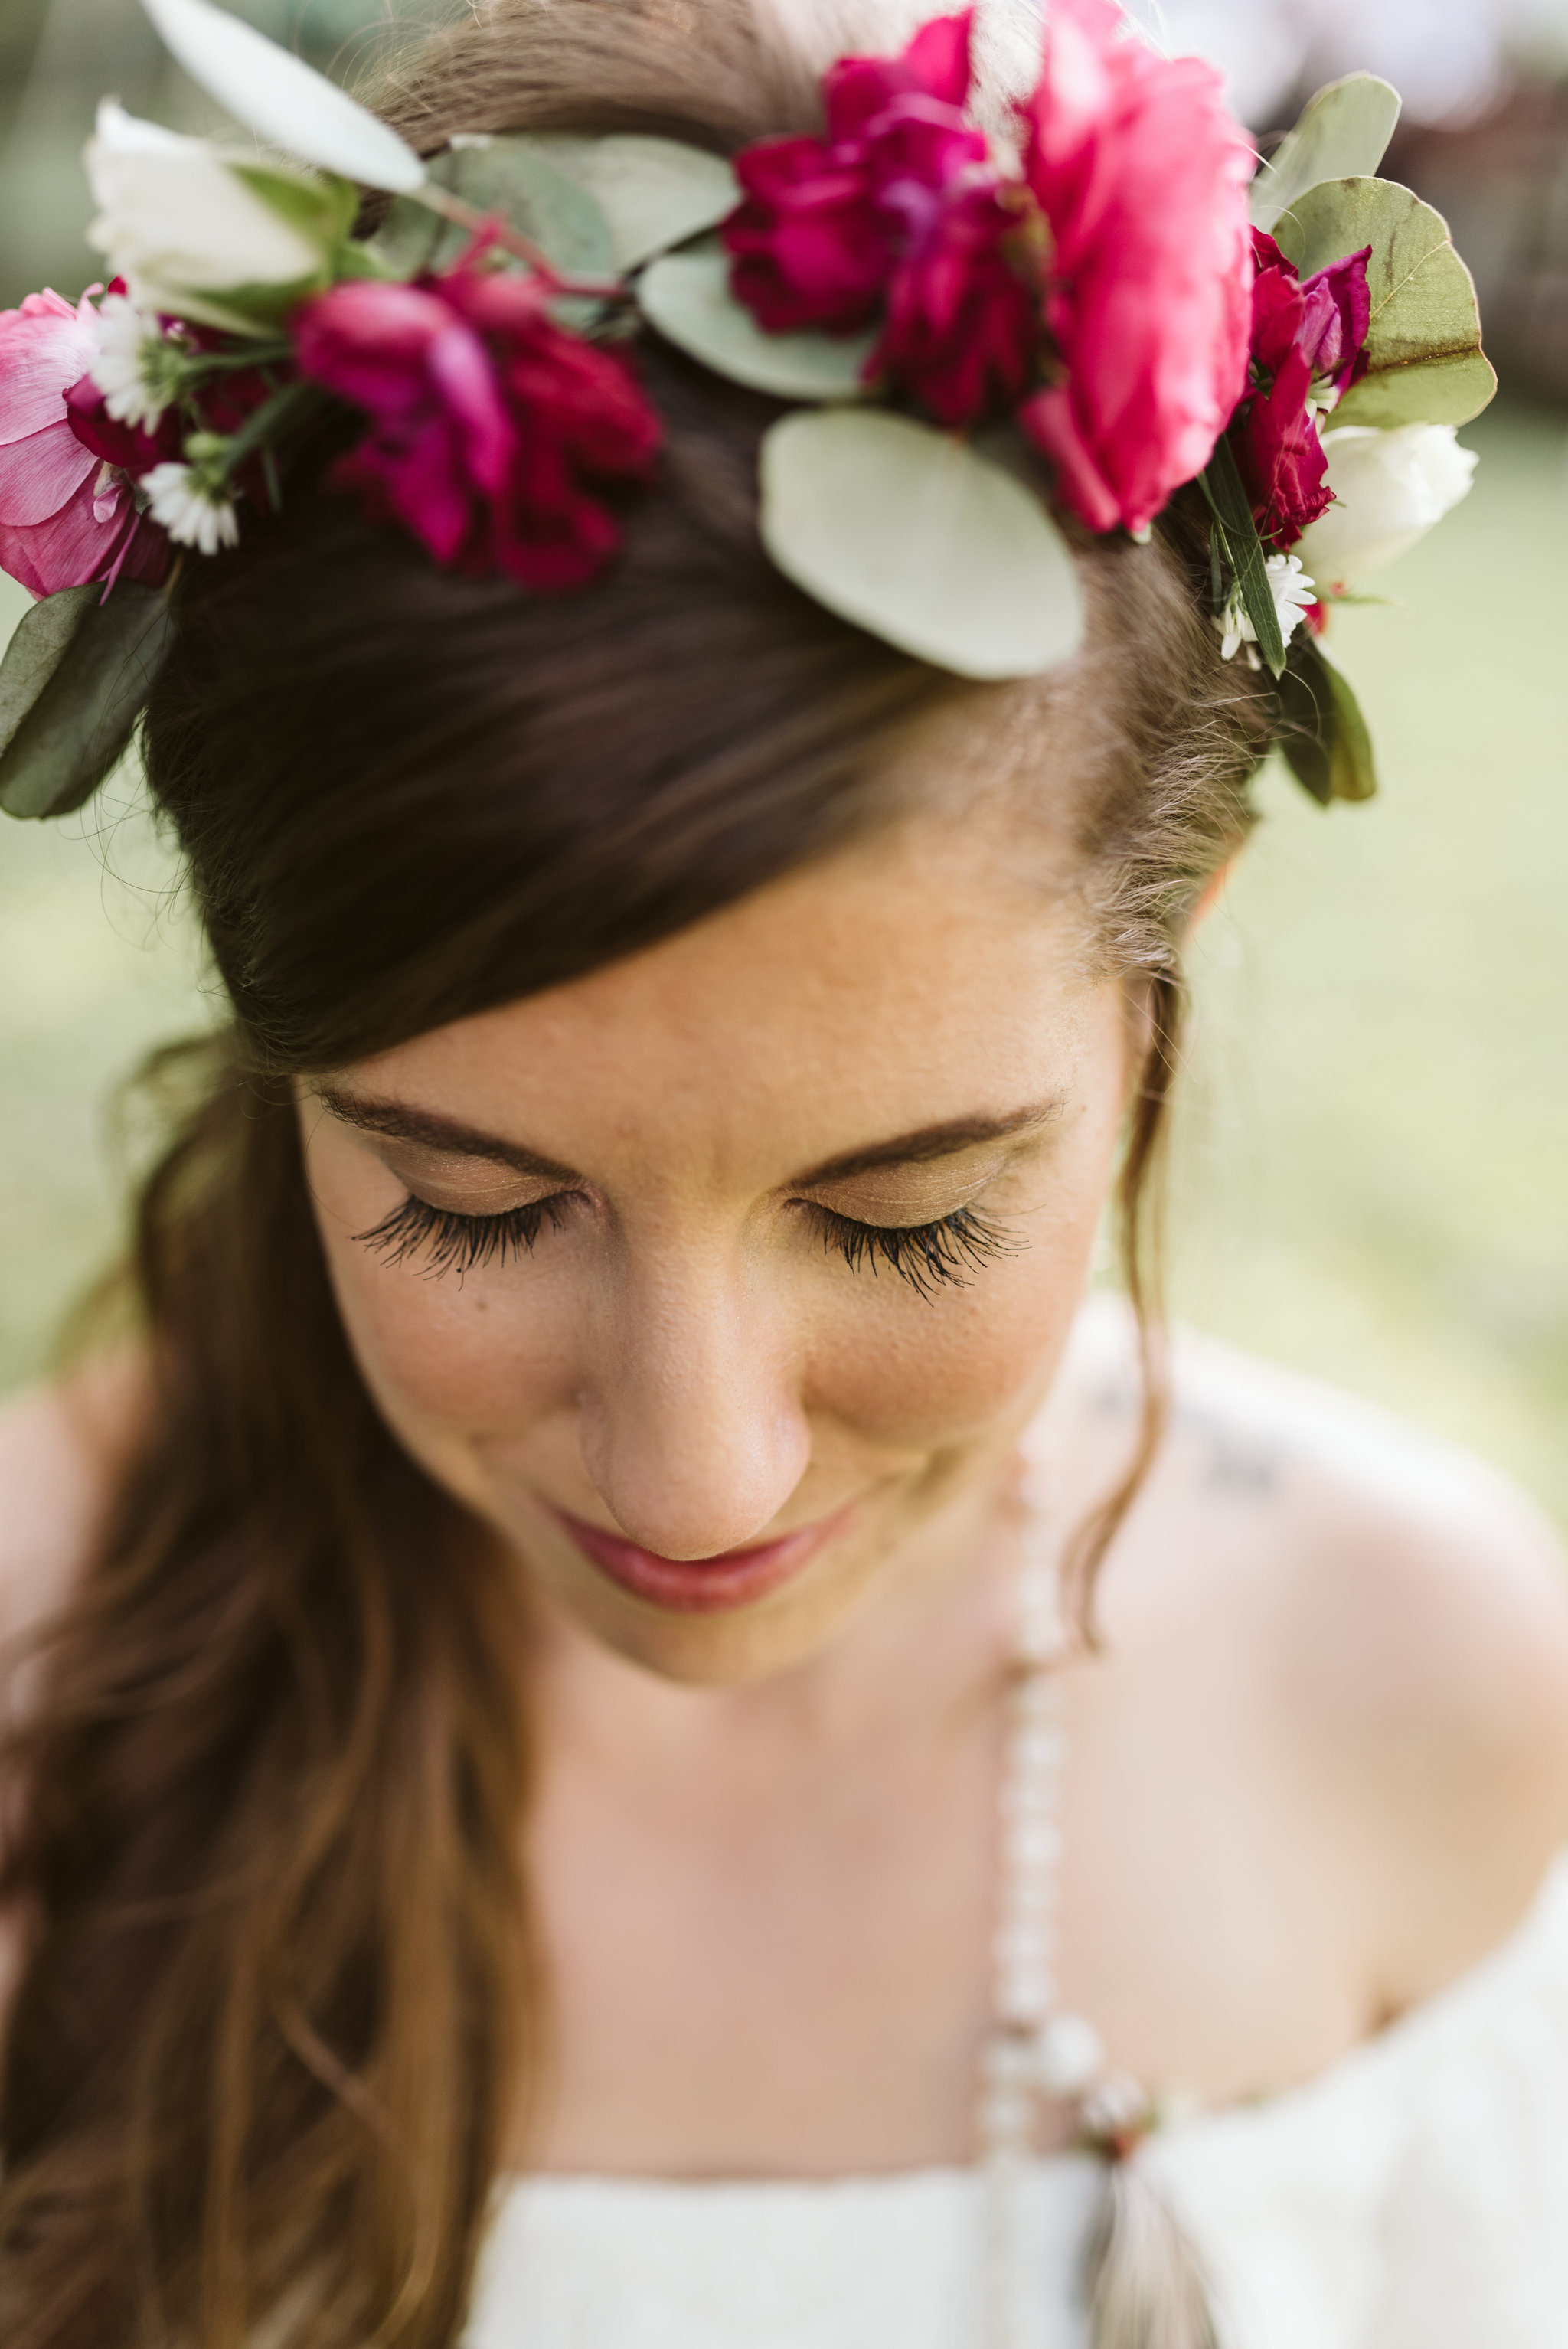  Annapolis, Quaker Wedding, Maryland Wedding Photographer, Intimate, Small Wedding, Vintage, DIY, Closeup of Bride, Flower Crown, Pink and White Flowers, Classic Bridal Makeup 